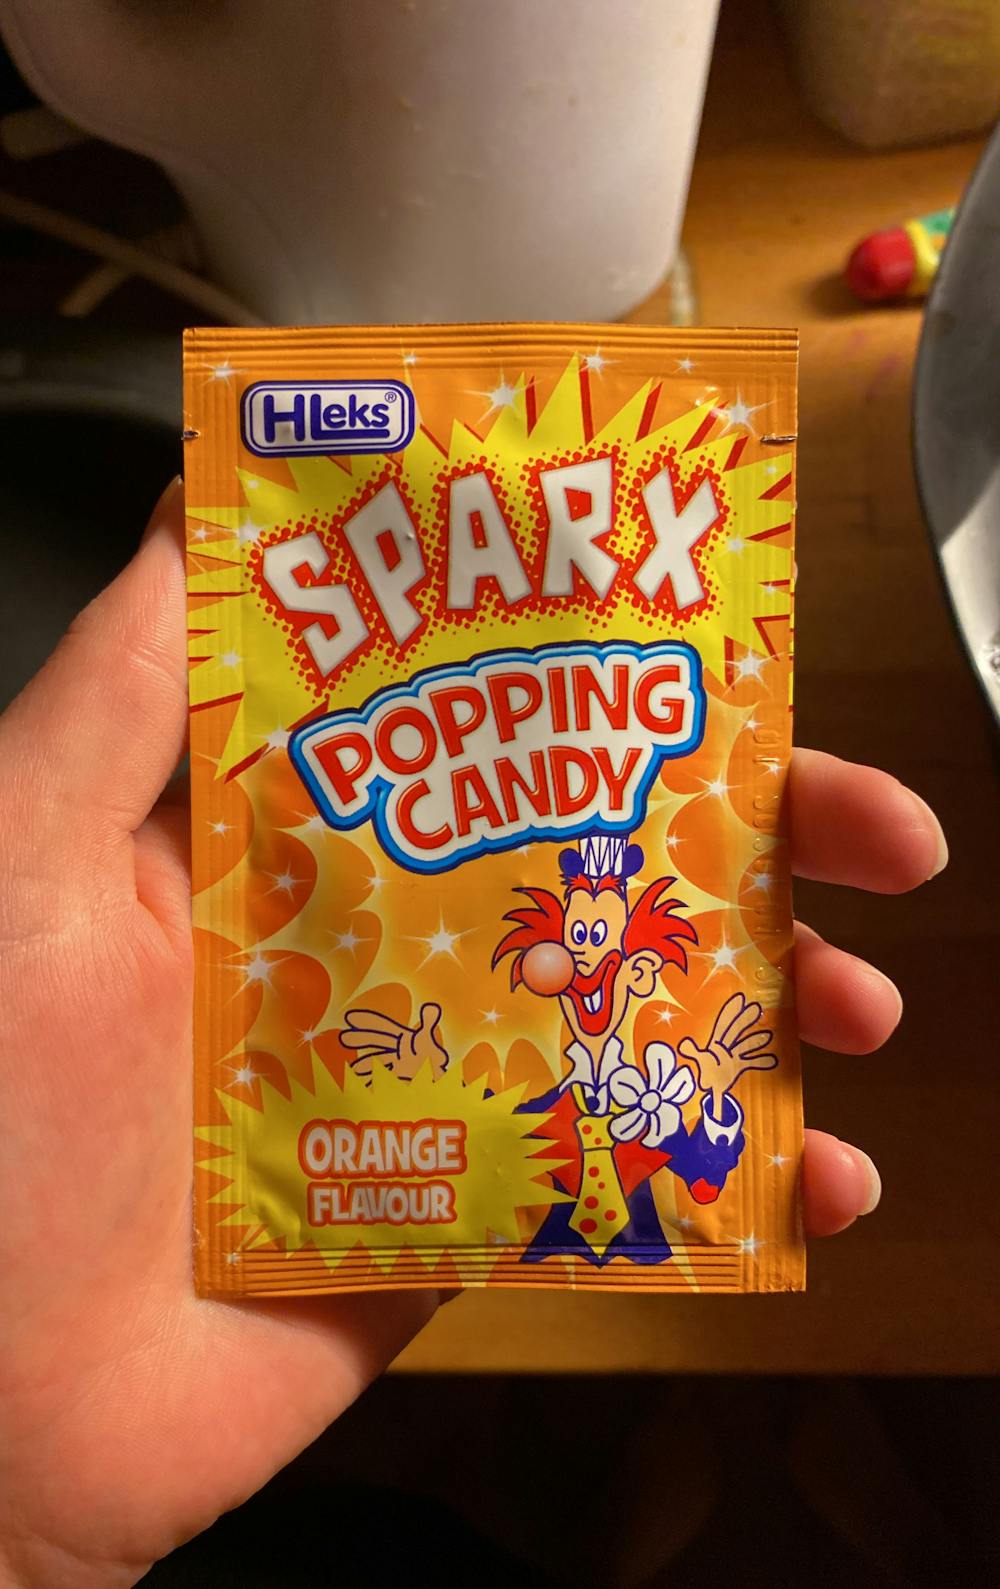 Sparx, popping candy, Hleks